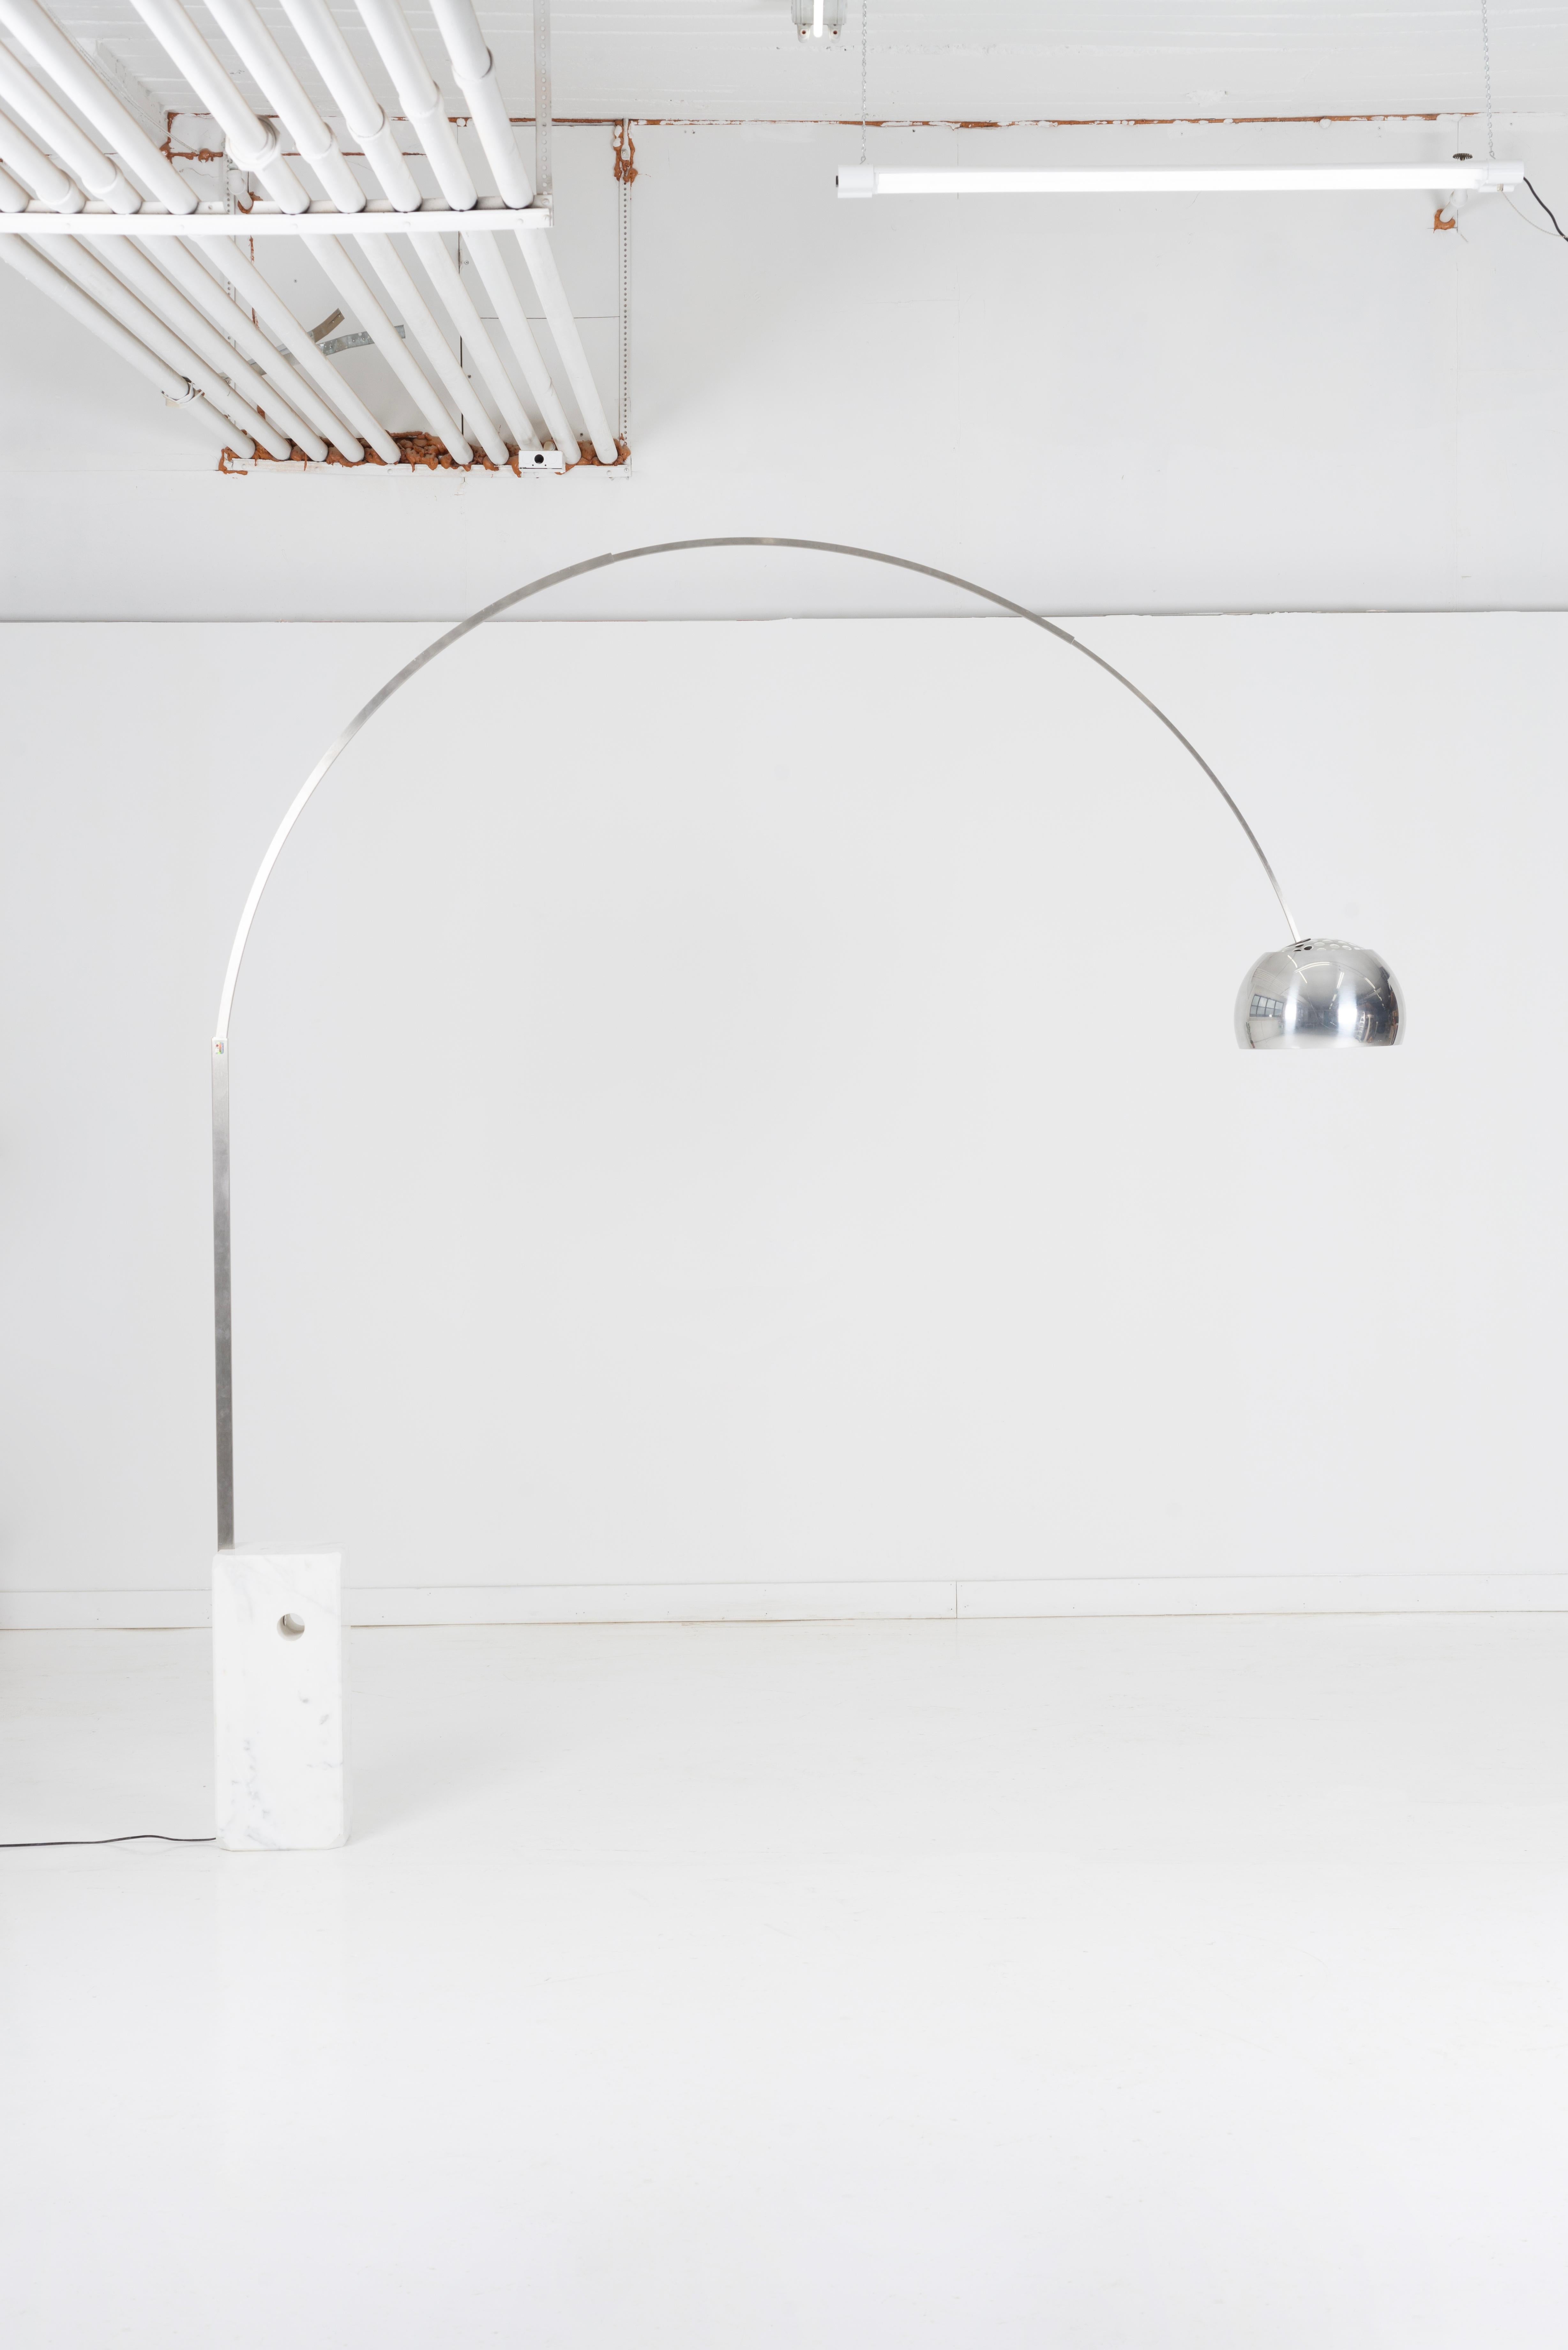 The Arco Lamp, an iconic piece of mid-century modern design, was conceived by Italian designers Achille and Pier Giacomo Castiglioni in 1962. This innovative and stylish floor lamp features a sleek, curved stainless steel arch that extends